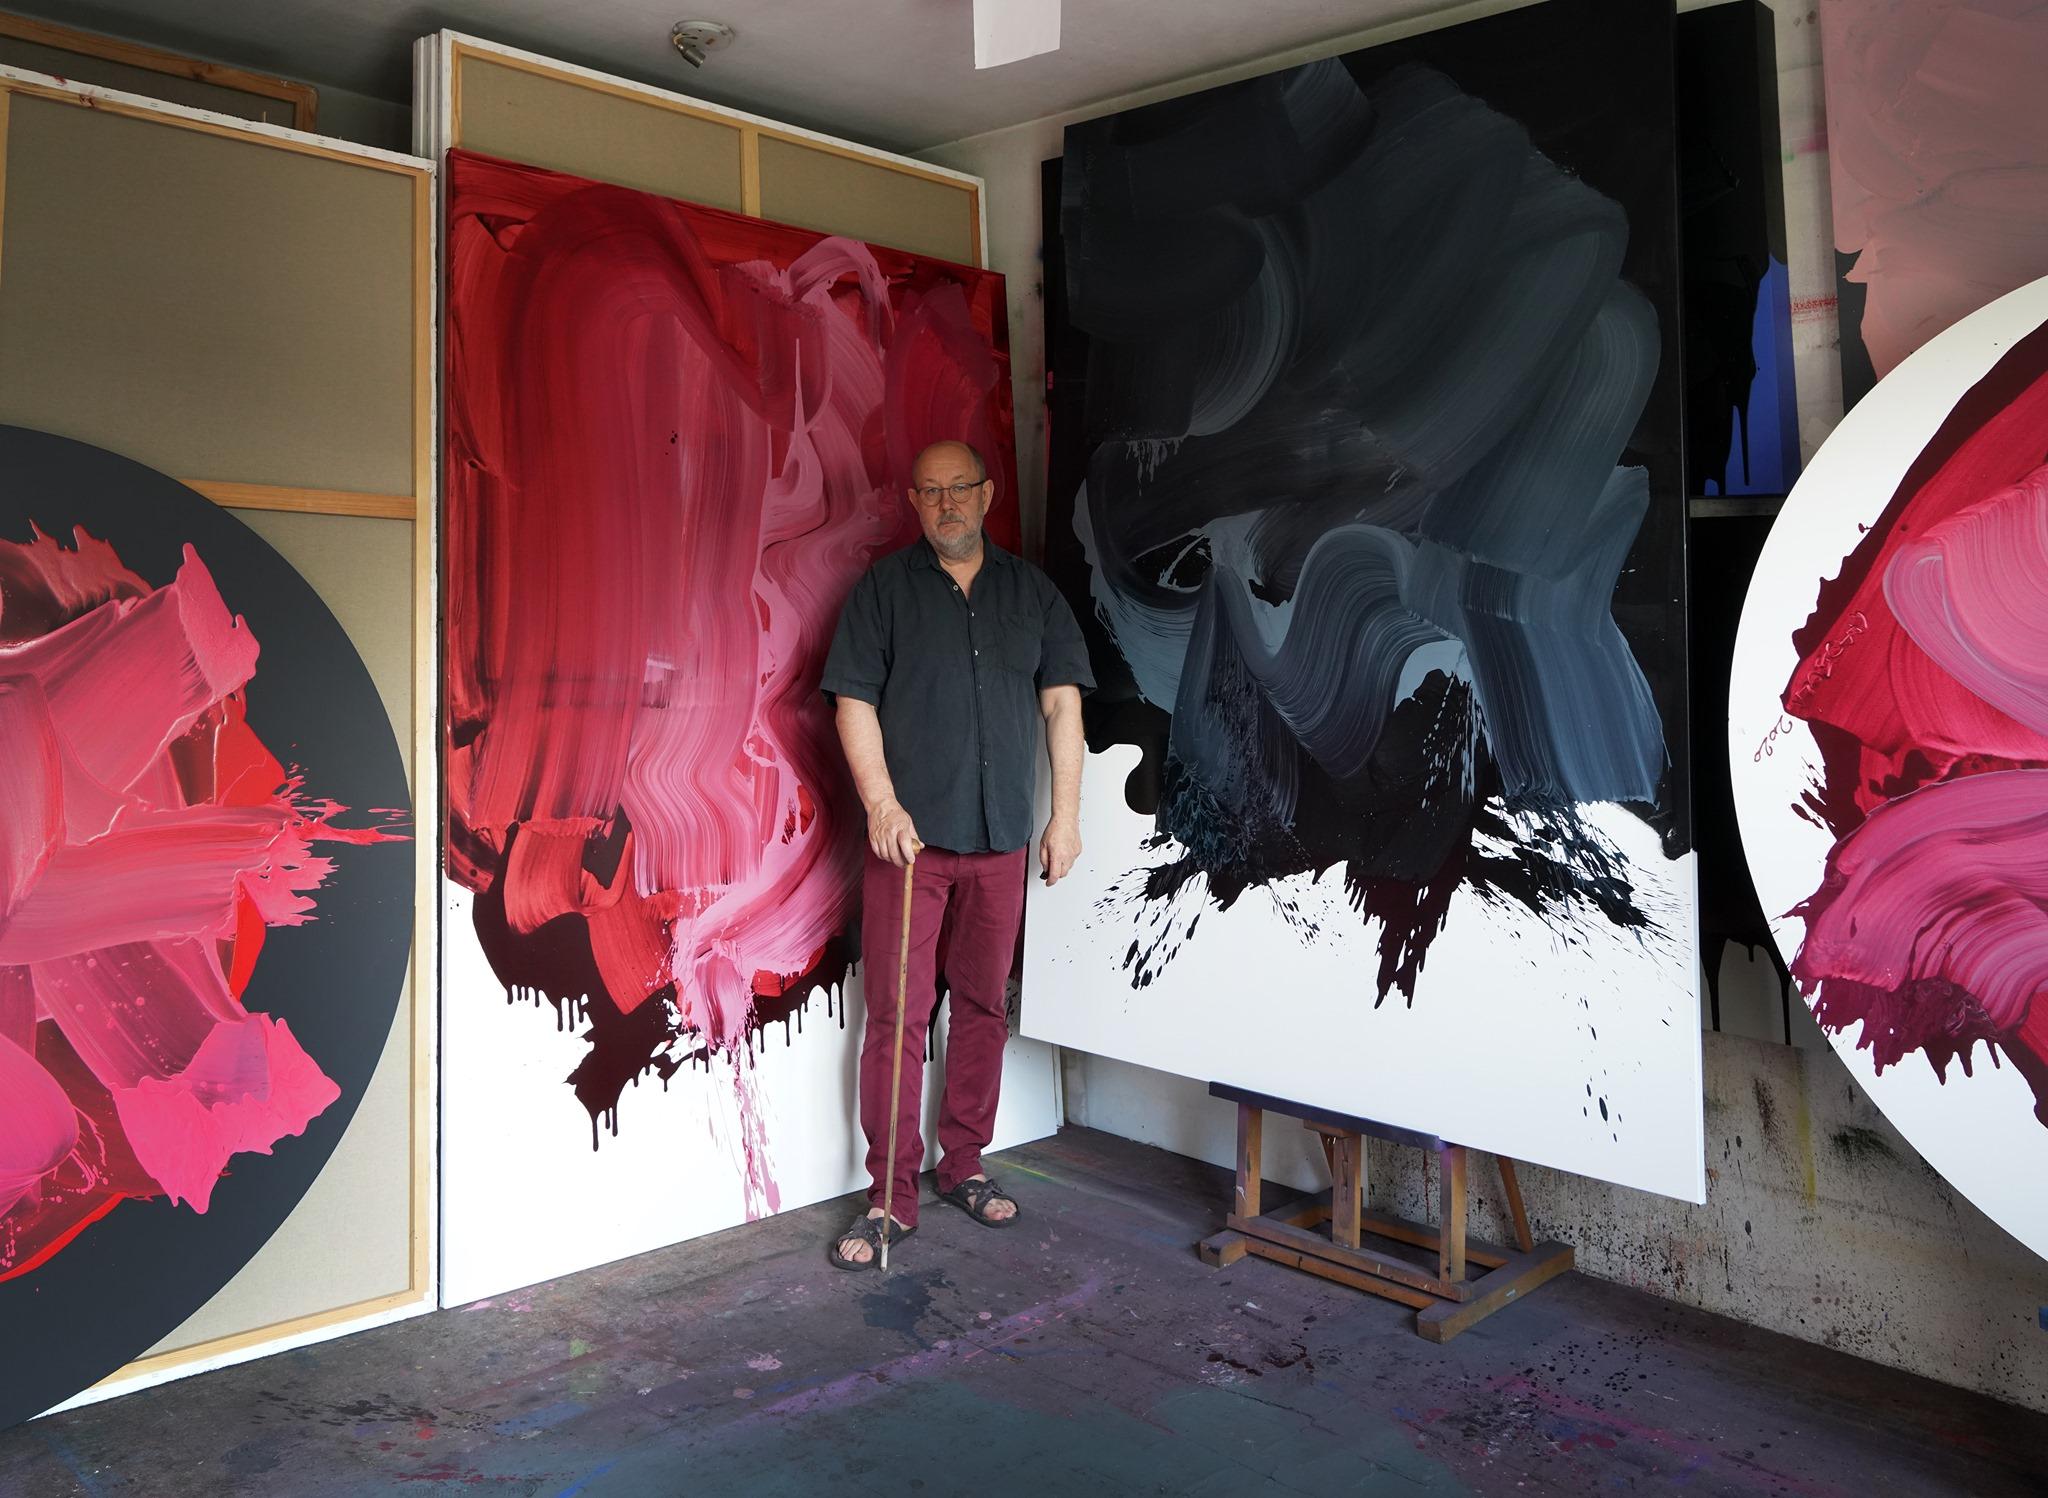 Artist about  his work:

BLOBS. THE CHARM OF DRIPPING PAINT

Flowing peacefully in the slow current of a narrow trickle between the feeling of senselessness and some deeply hidden hope or – rather – the need for sense, my painting is closing a